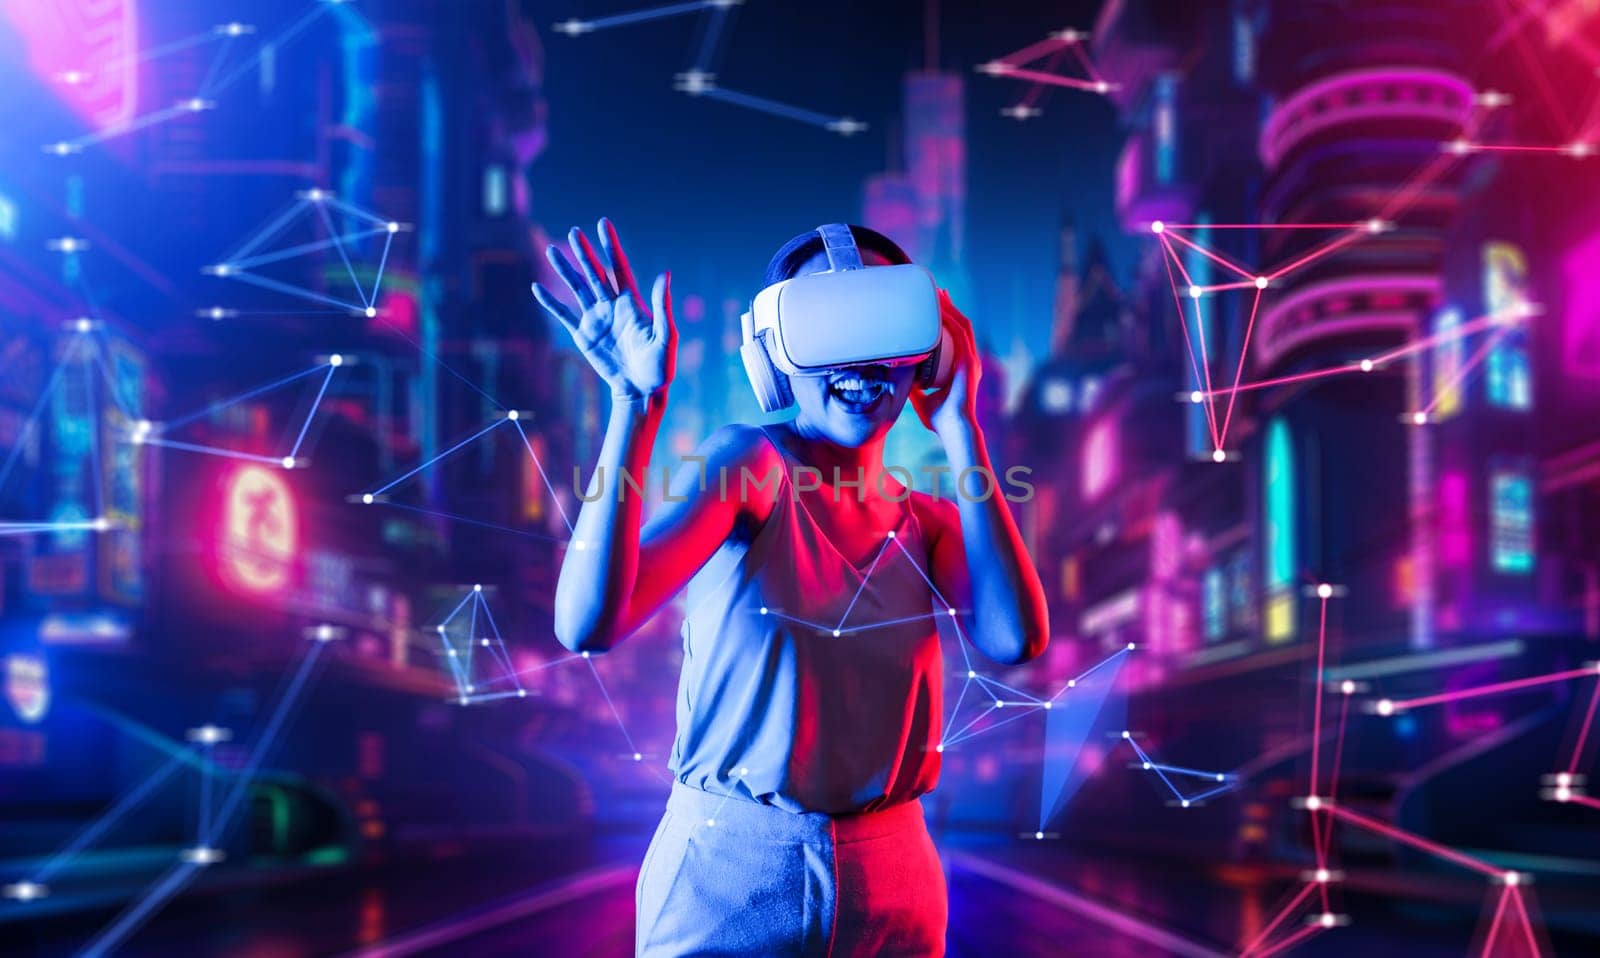 Female standing in virtual reality cyberpunk style building wear VR headset connecting metaverse, future cyberspace community technology, Woman dancing raising one arm holding goggle. Hallucination.